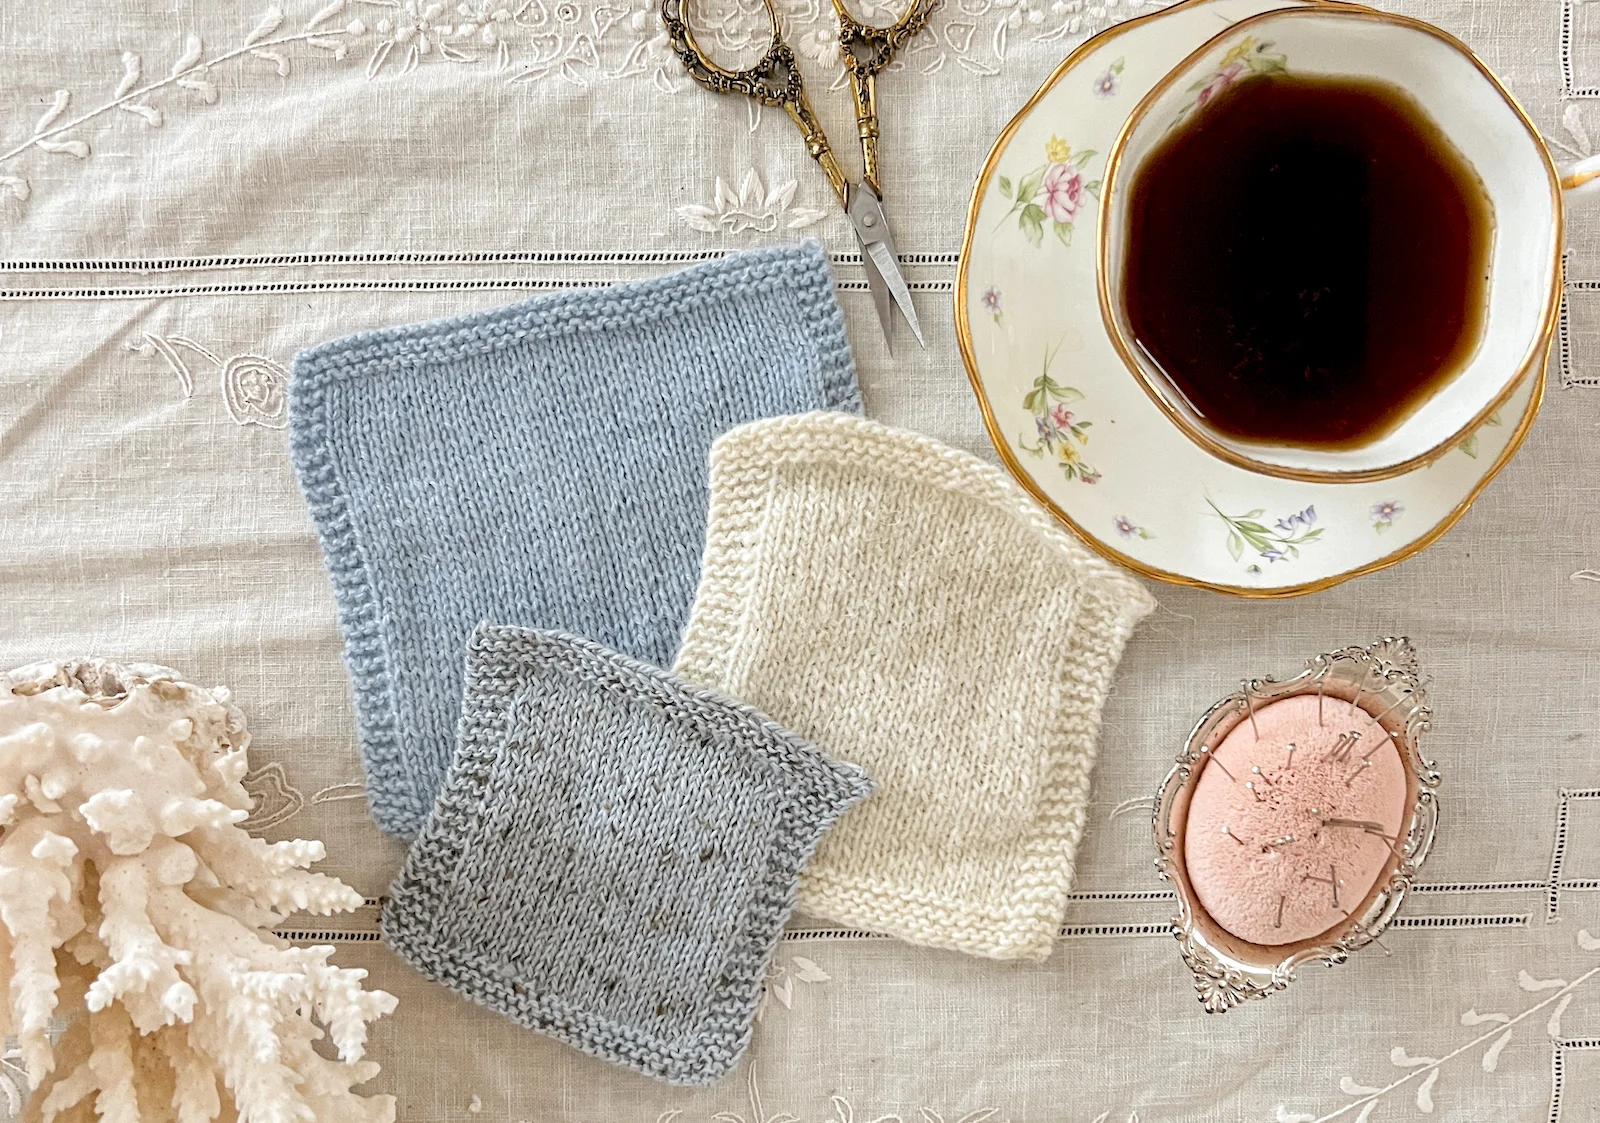 A flatlay photograph showing three swatches of yarn in blue, white, and gray, along with a chunk of white coral, a pair of brass scissors, a teacup full of coffee, and a pink pincushion.